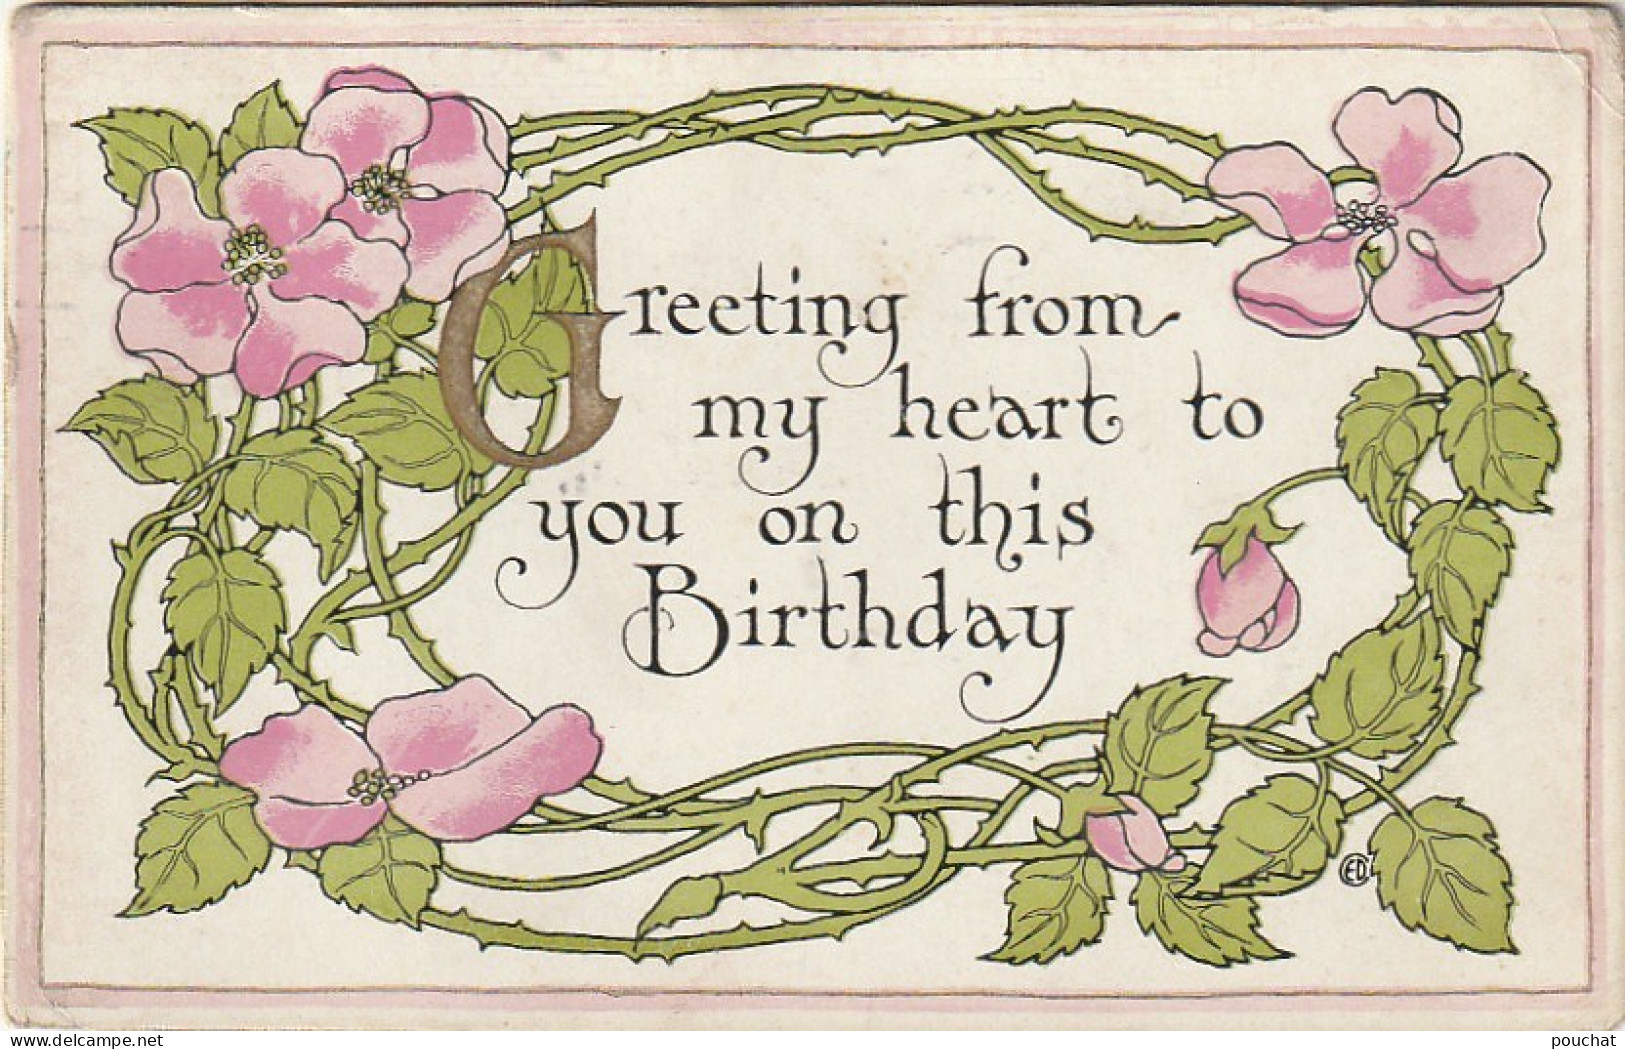 Z+ 6- " GREETING .. TO YOU ON THIS BIRTHDAY " - CARTE ANNIVERSAIRE  FANTAISIE - TIGES DE ROSES ENCHEVETREES  - 2 SCANS - Geburtstag